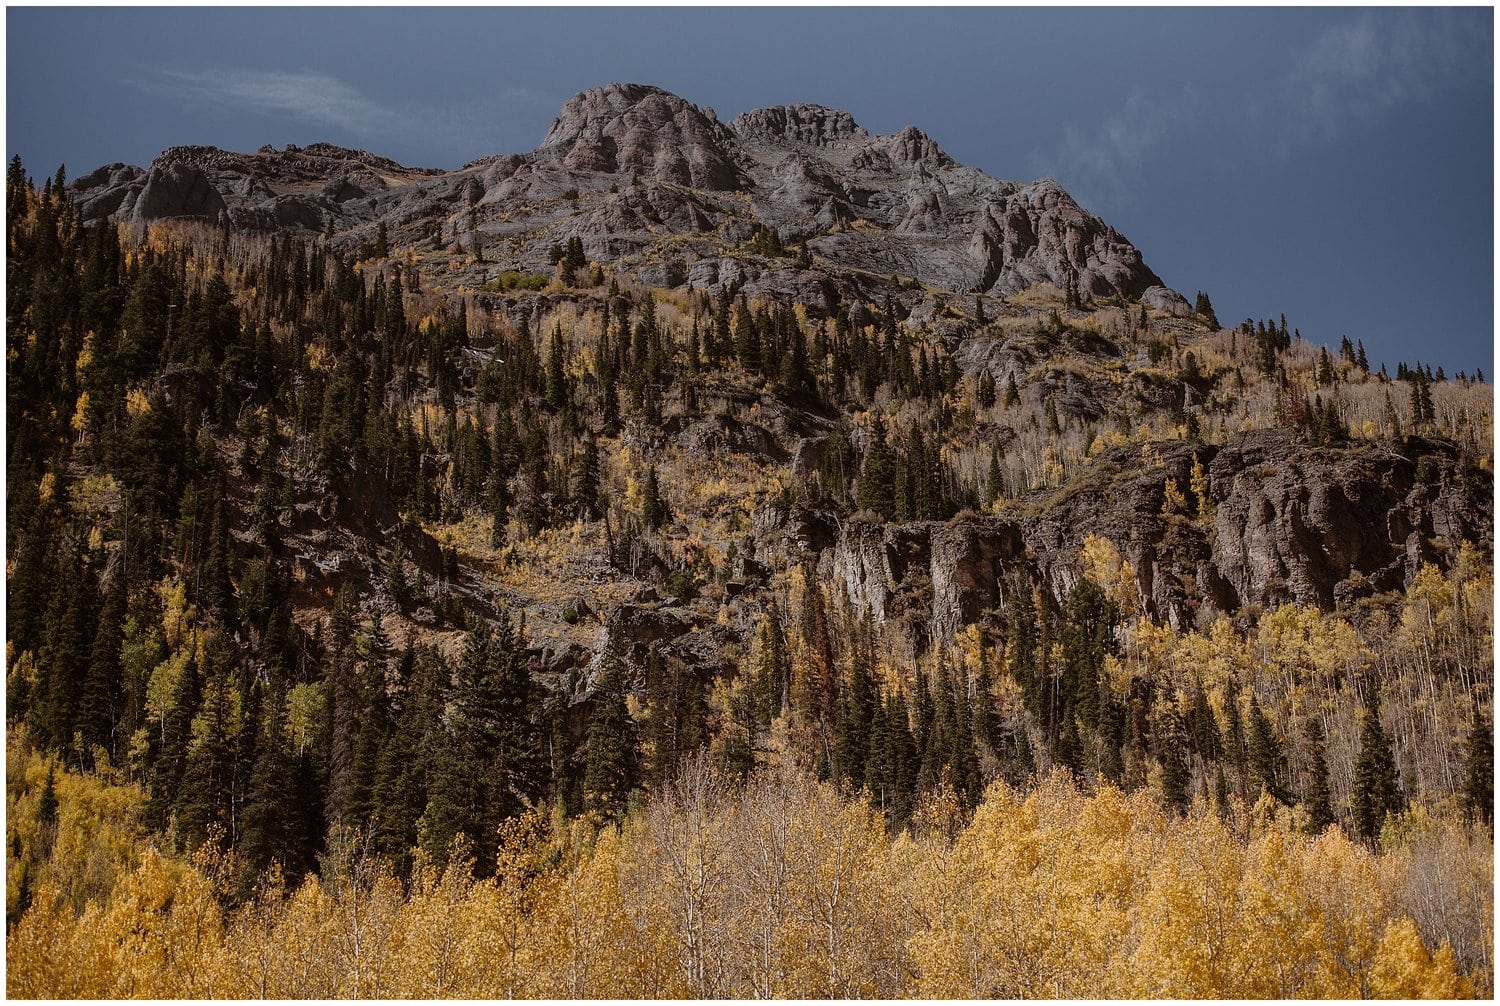 Landscape of mountain with aspen trees and fall colors in Ouray, Colorado. 